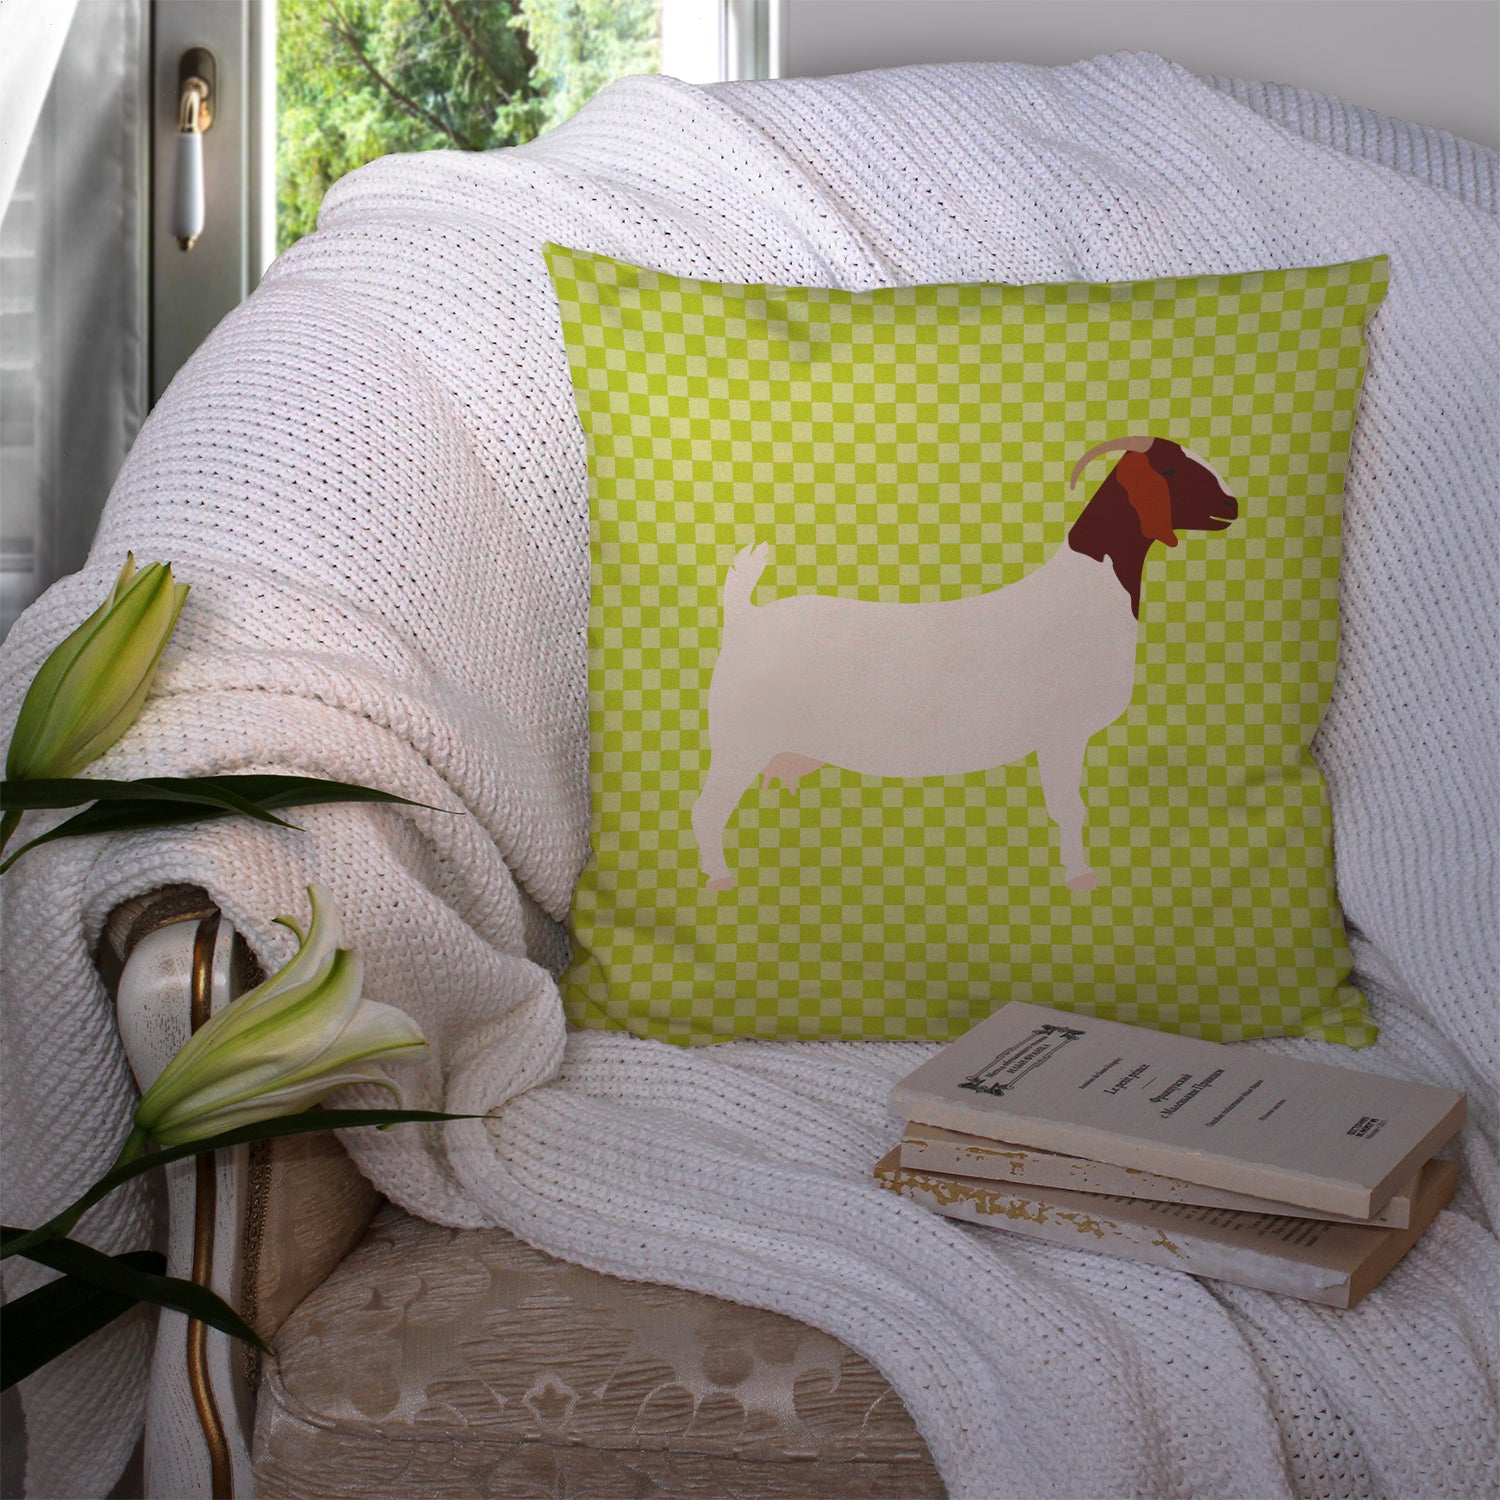 Boer Goat Green Fabric Decorative Pillow BB7712PW1414 - the-store.com